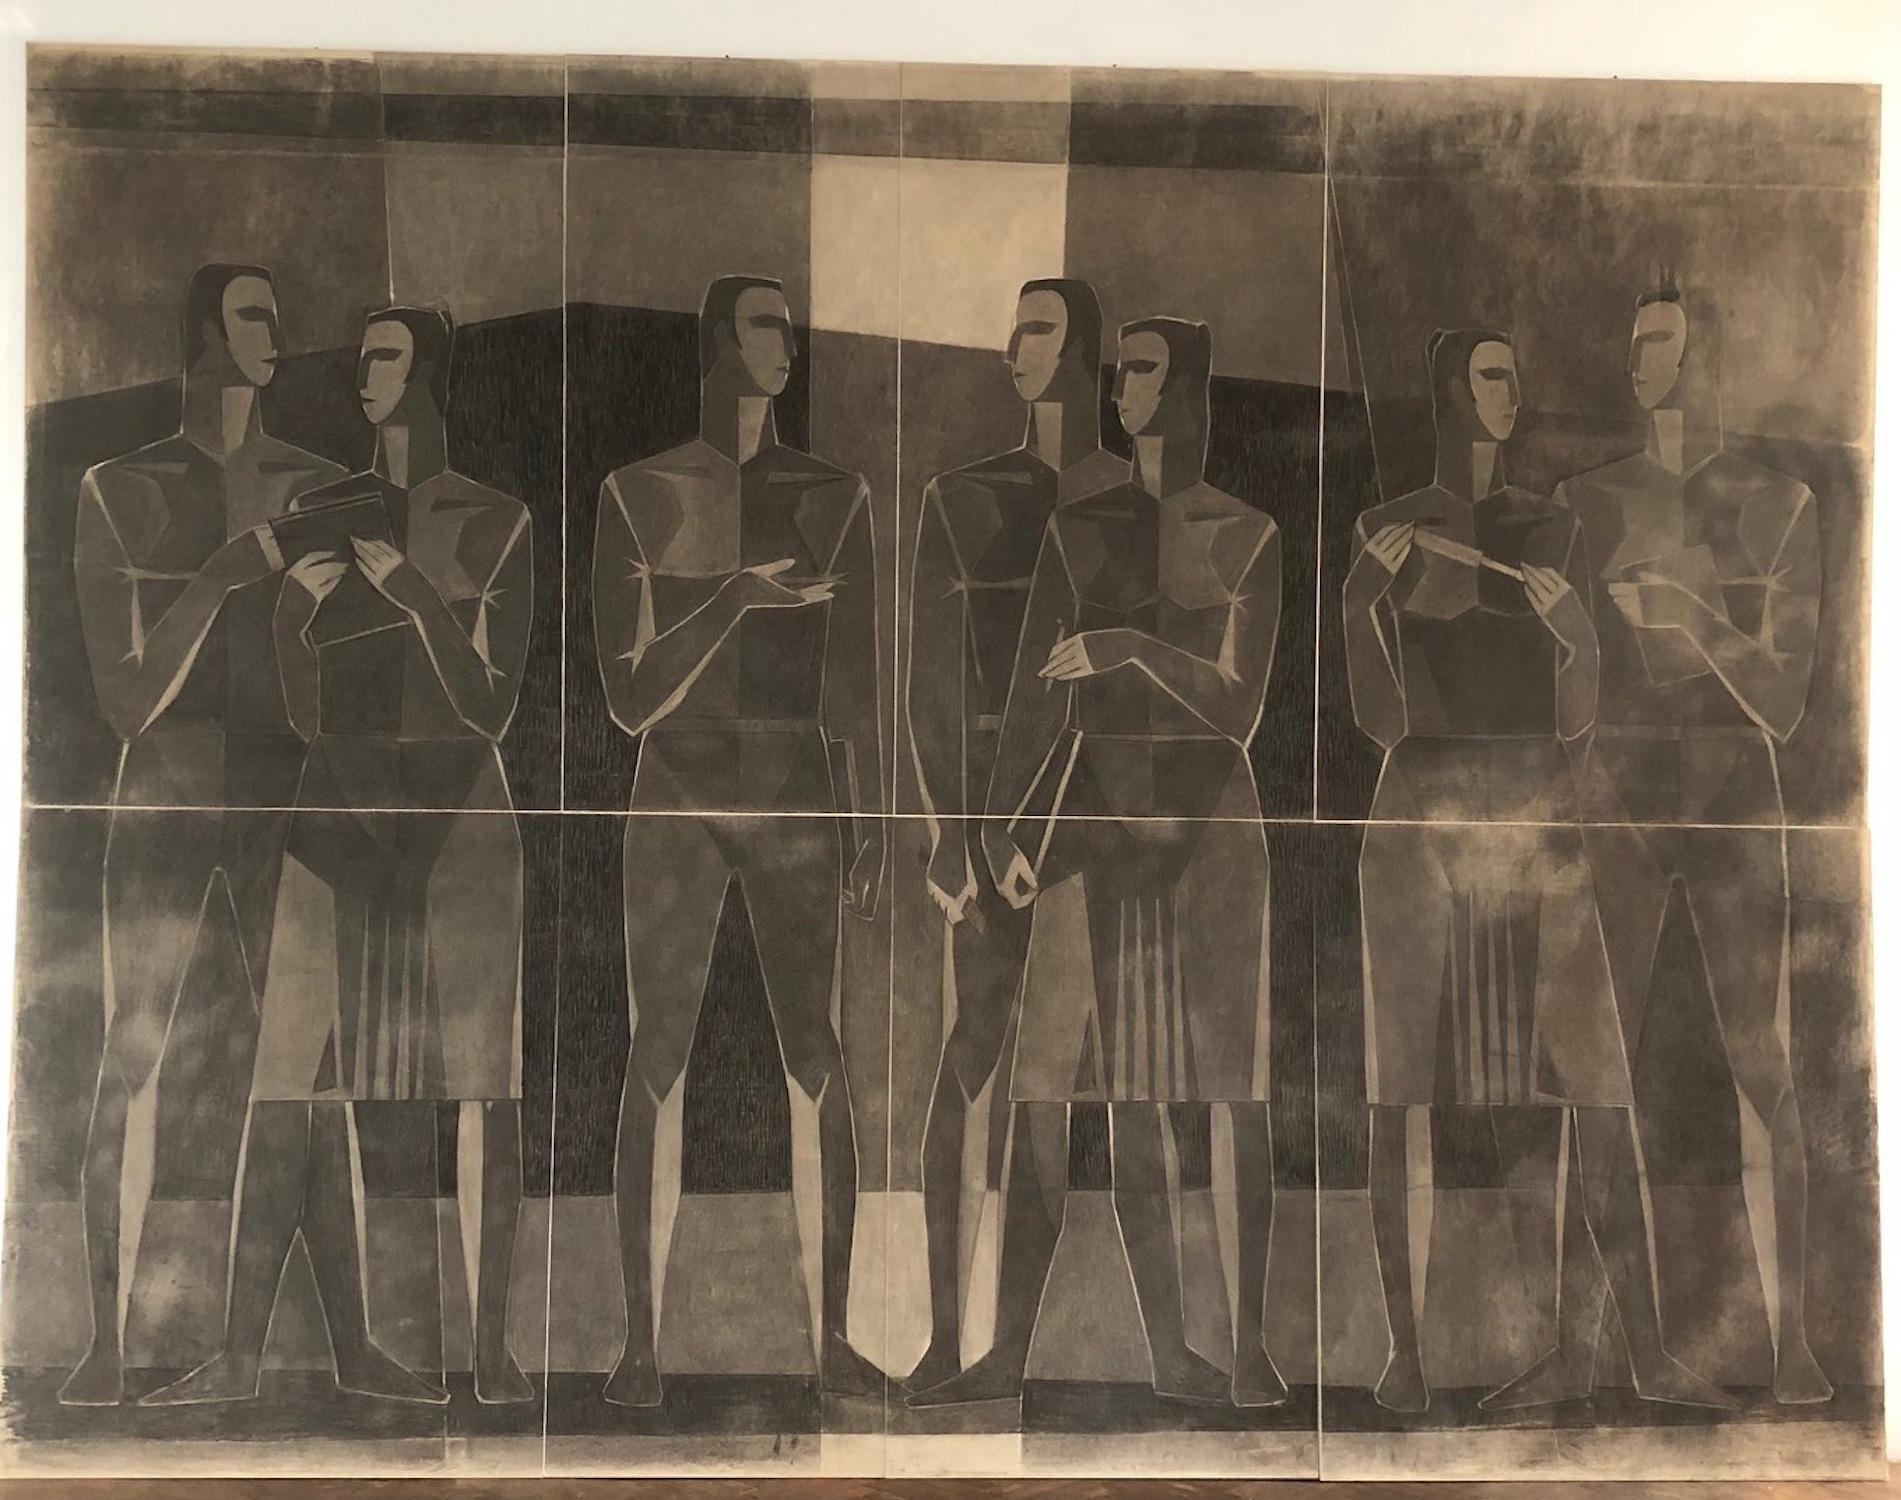 Outstanding Monumental  Artwork Consists of 8 mounted Cubist charcoal drawings mounted on blind canvas frames.  
Drawing for the Panon University Hall Mosaic Project executed in 1965, City of Veszprem, Hungary. 
size : 420 x 370 cm cca

Lajos Kántor